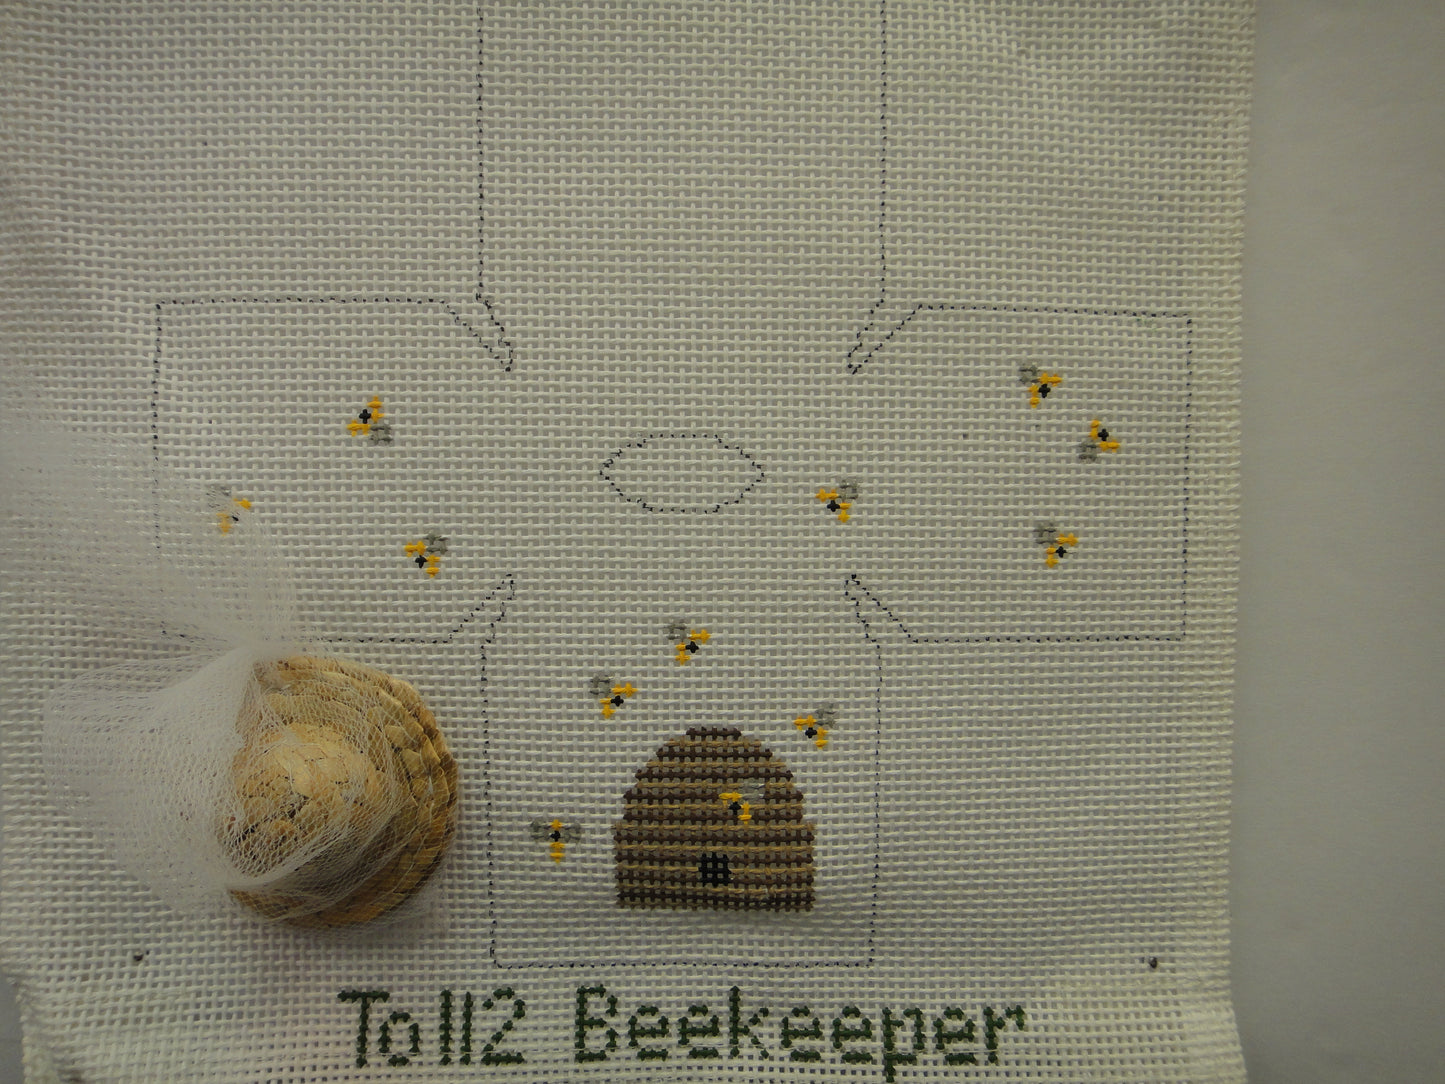 TO112 Bee Keeper